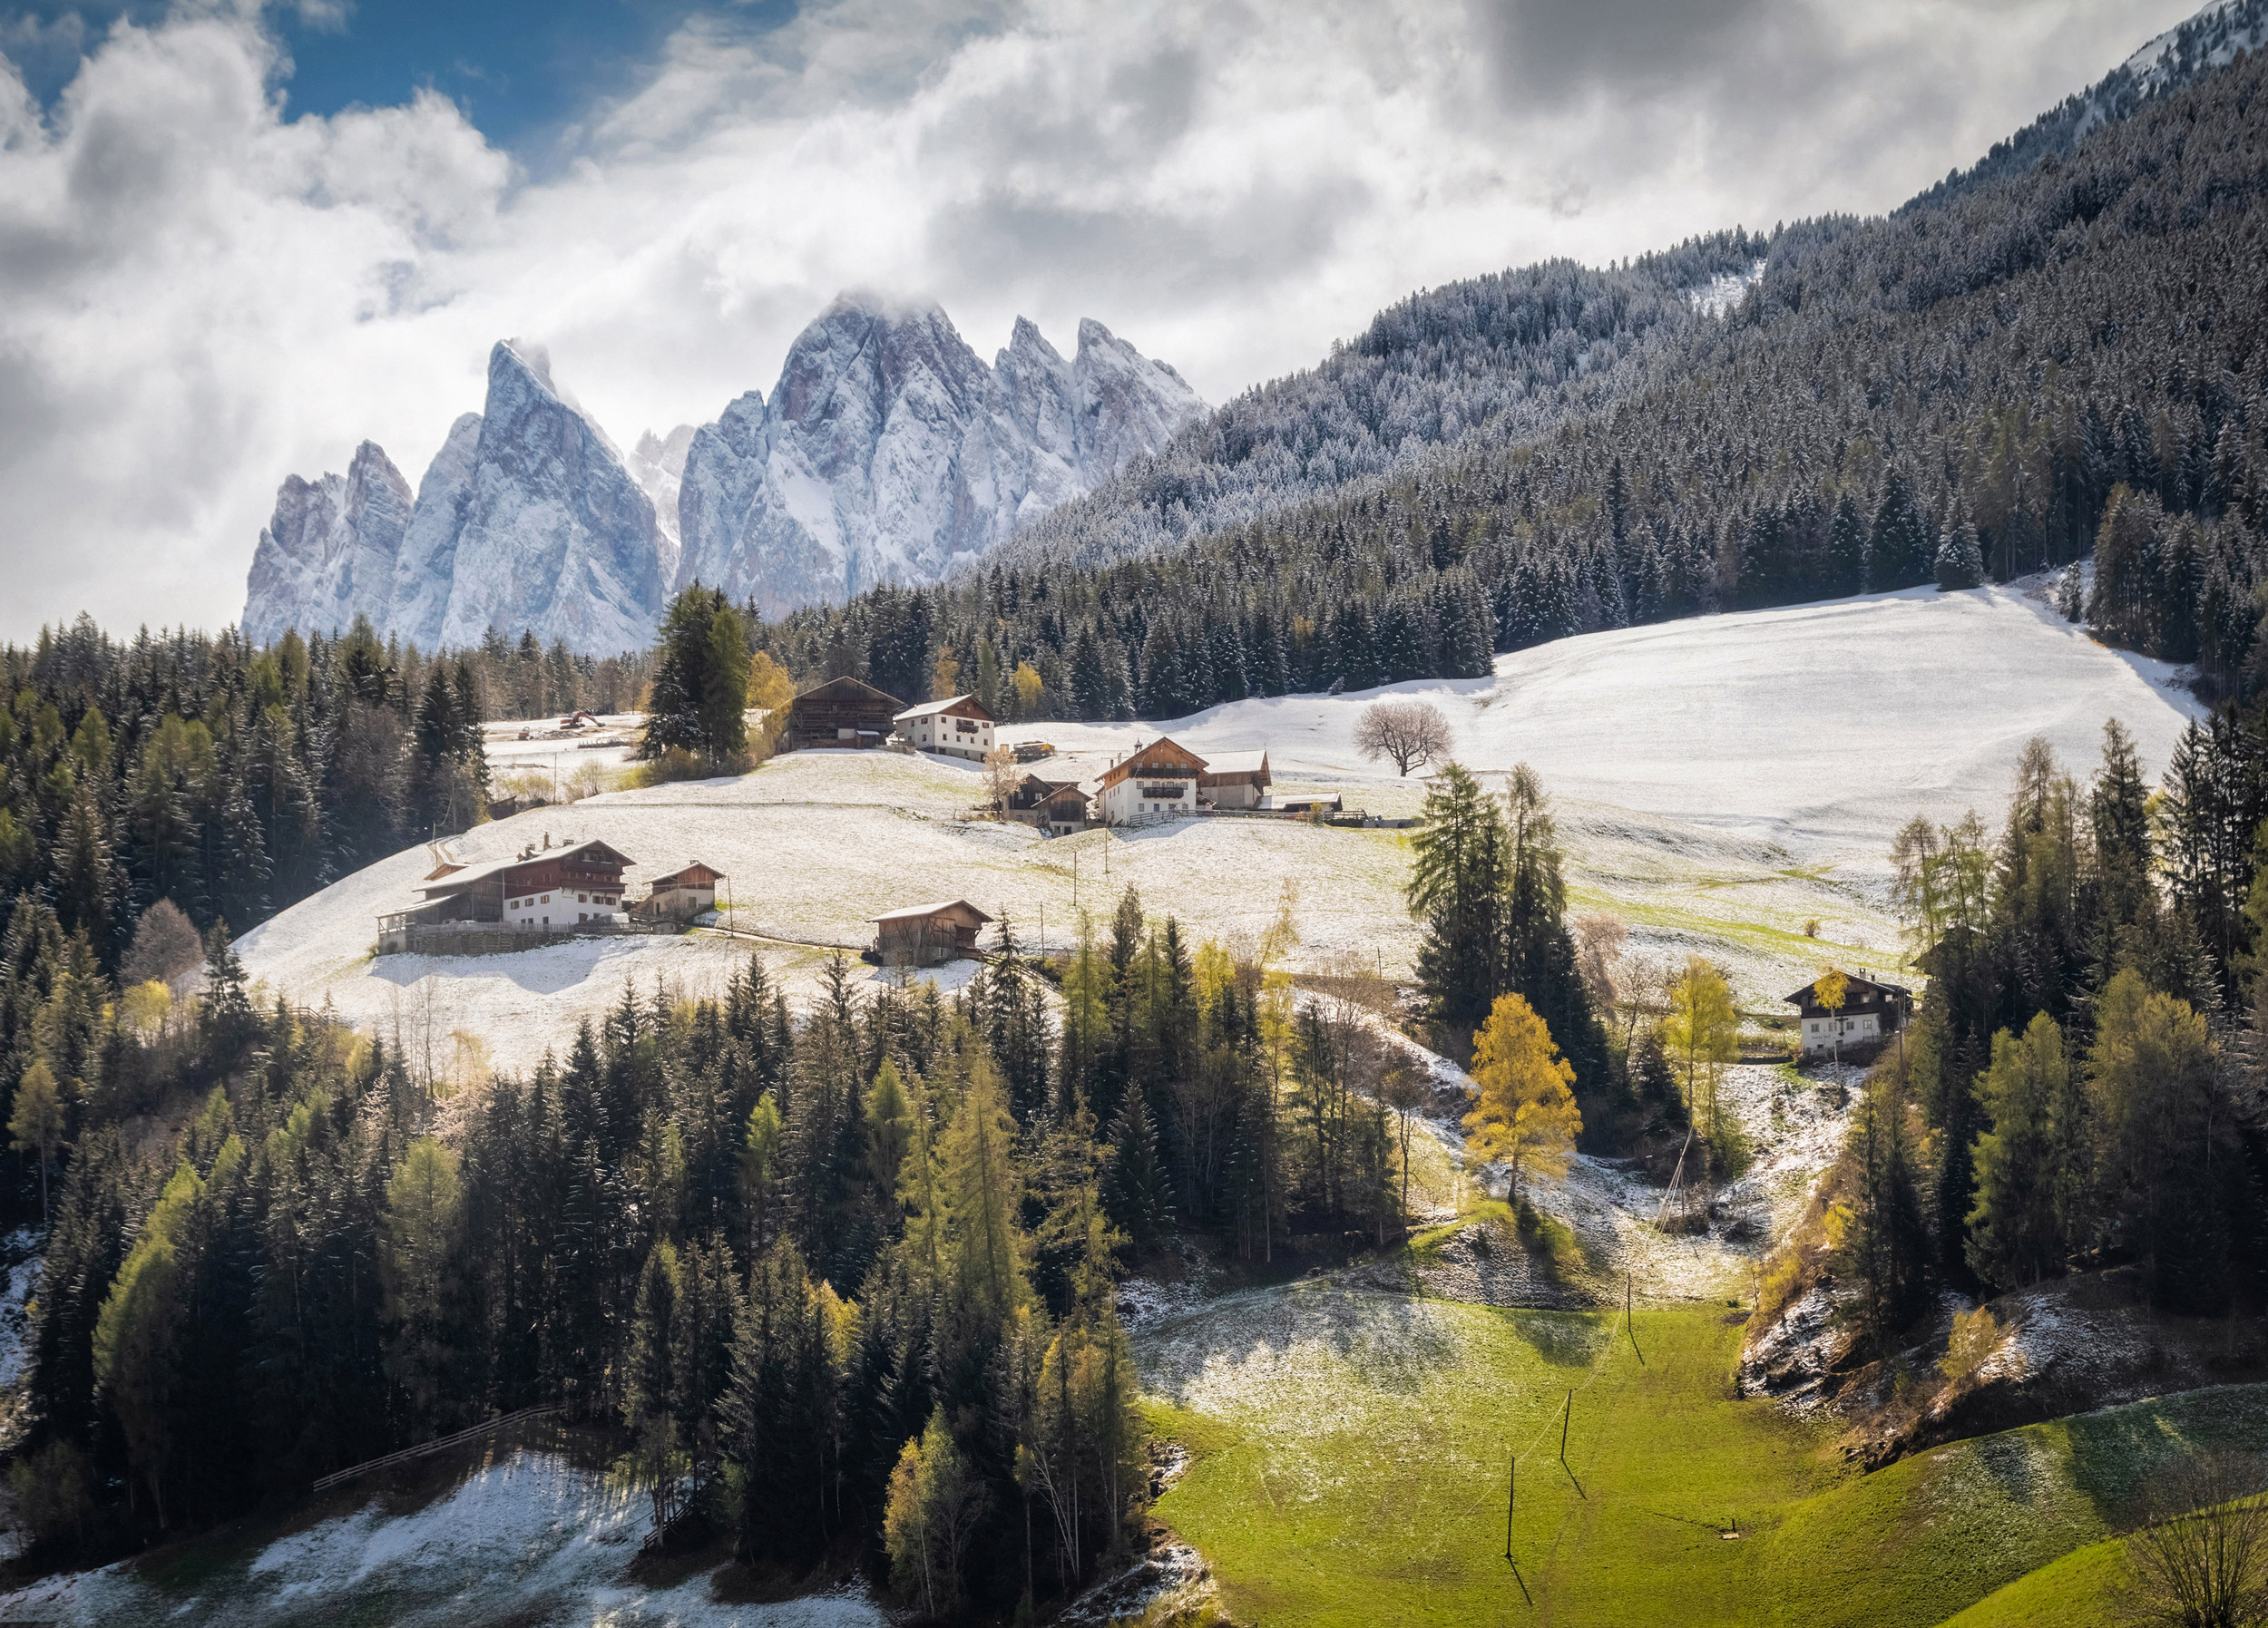 Famous alpine place of the world, Santa Maddalena village with m